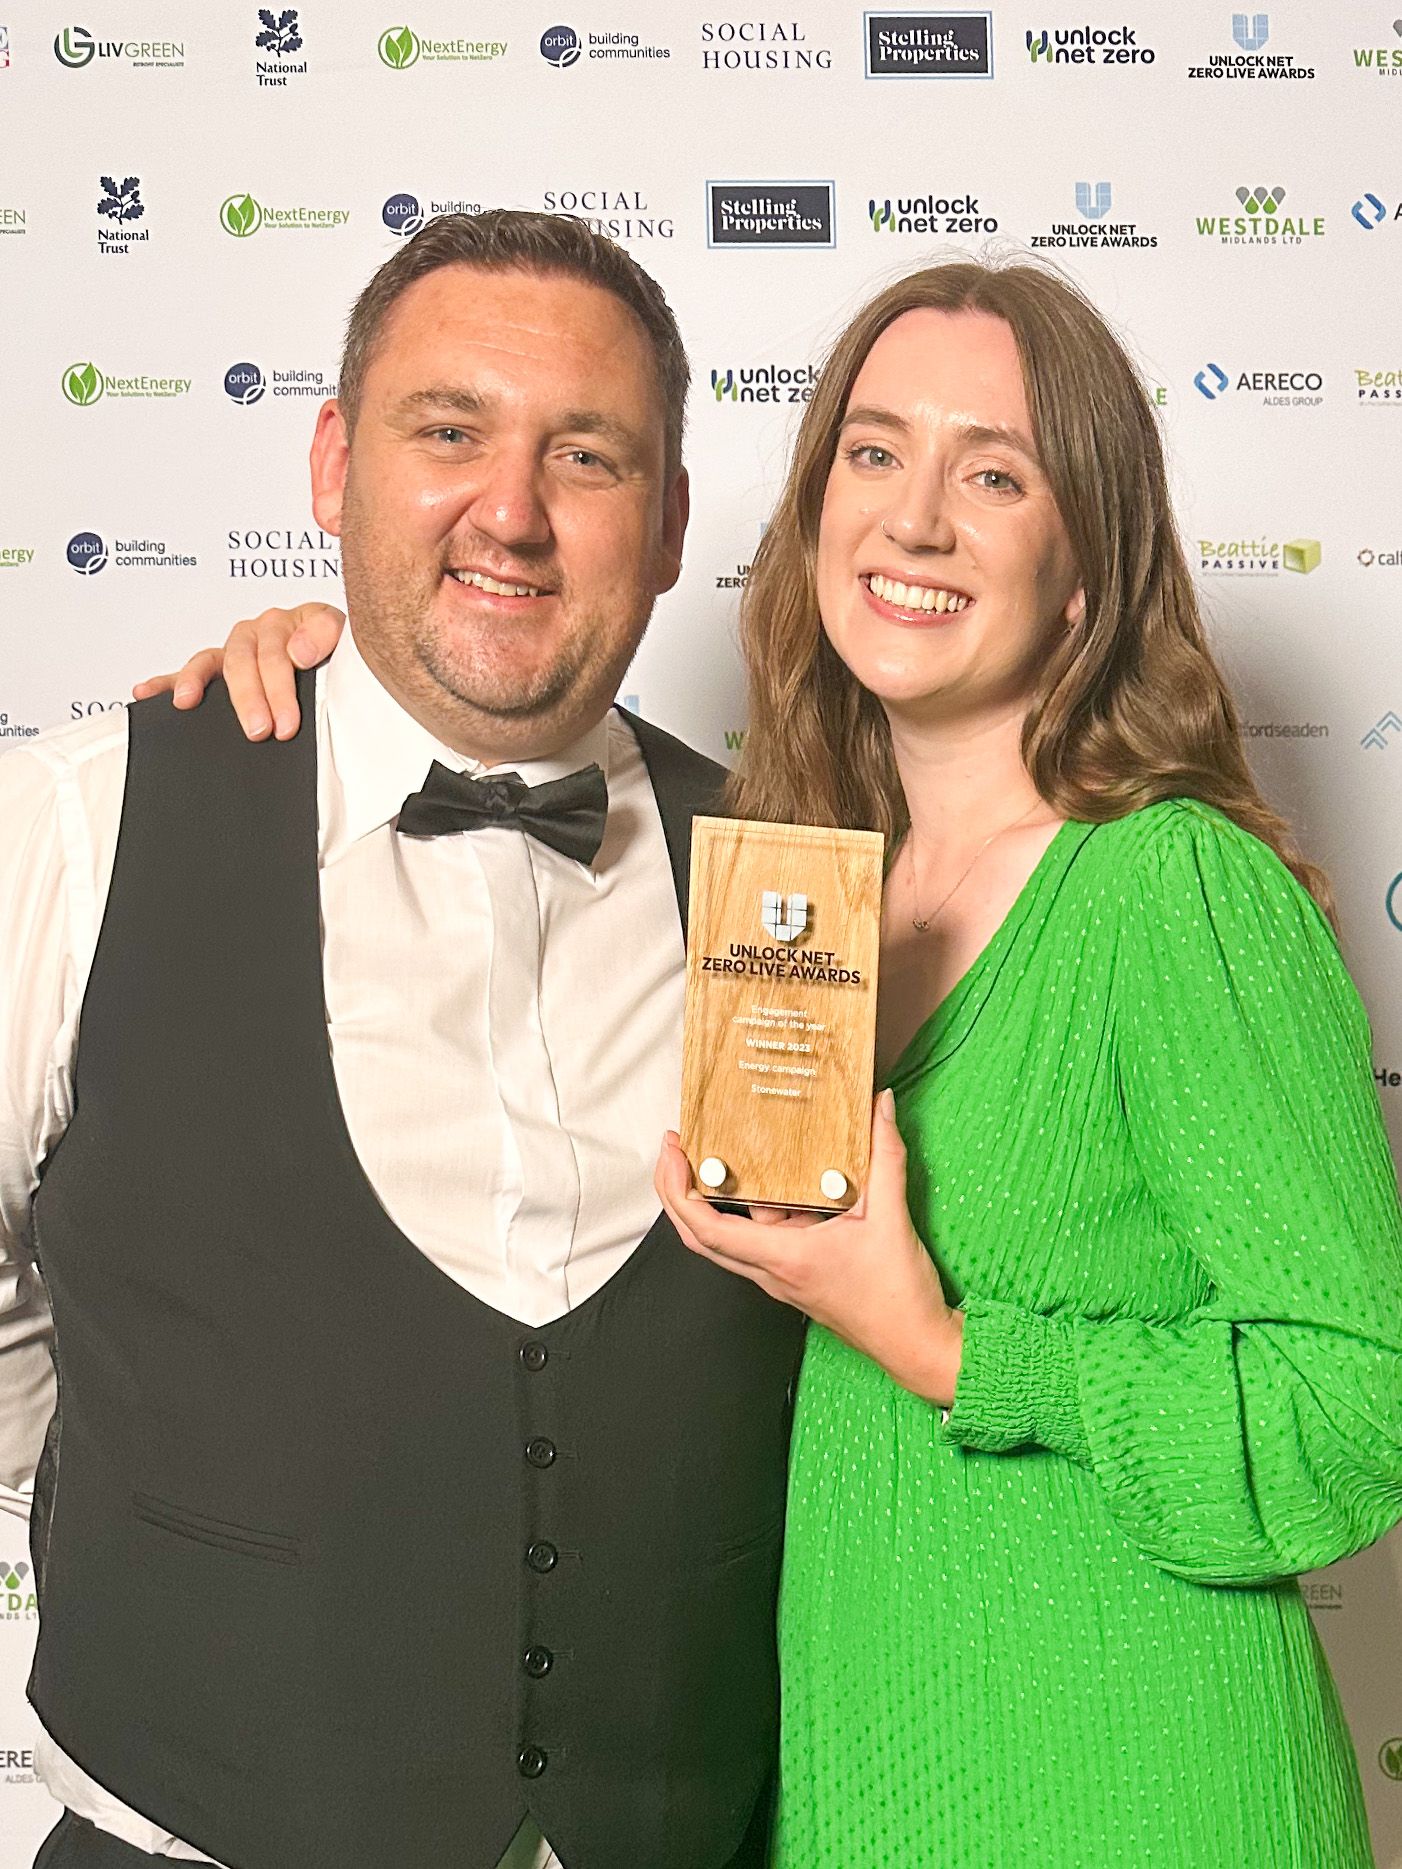 Stonewater colleagues holding award, pictured left to right: Matt Smart and Emily Batchford